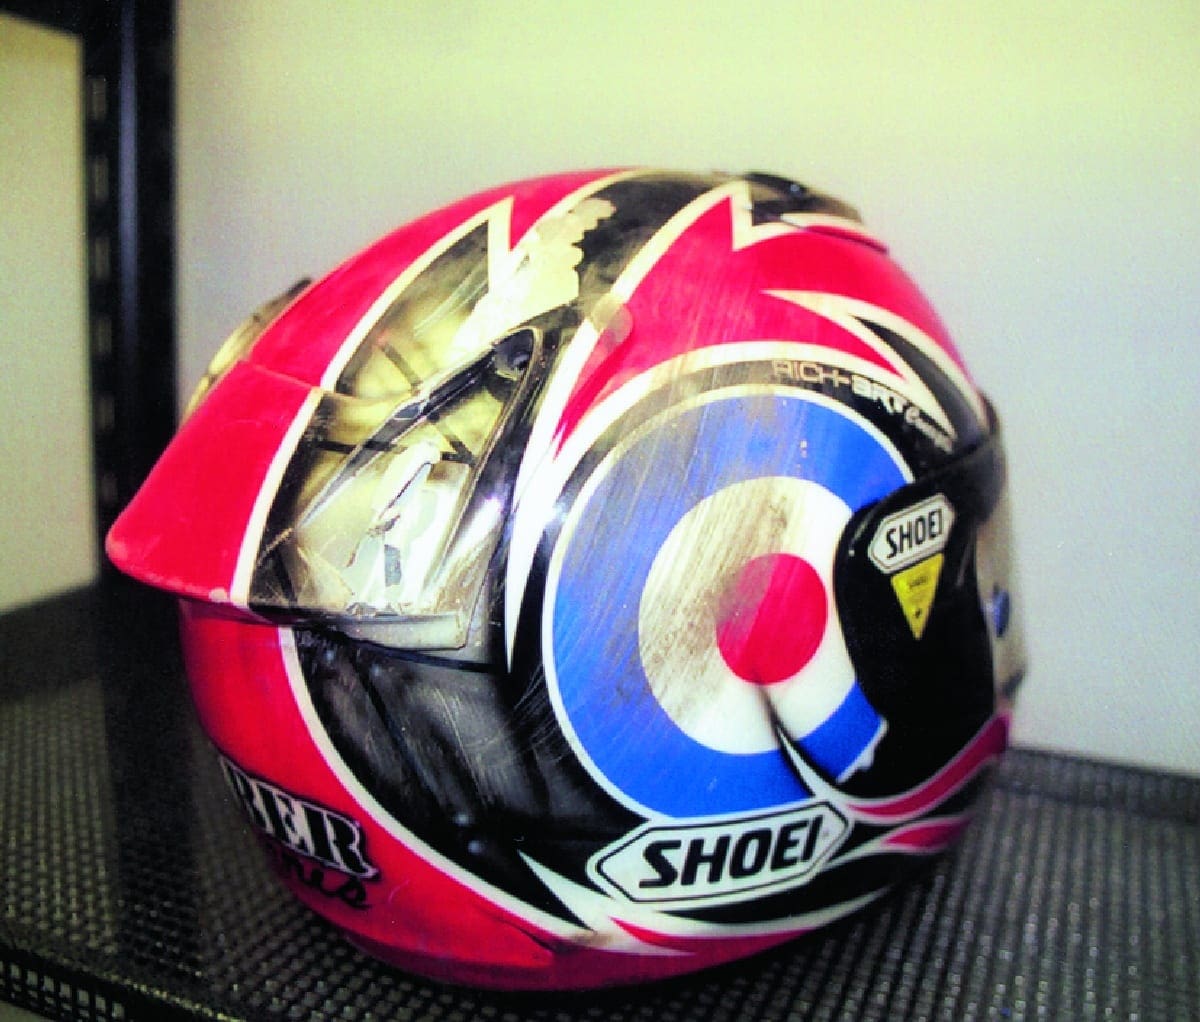 British Superbike (BSB) racers sponsored by Shoei use ‘off-the-shelf’ helmets, exactly the same as you or I can buy, except they are then painted by experts in their racing colours. Karl Harris head-butted the tyre wall at Brands Hatch last year at 146mph wearing this very helmet here. His bike and his pride were more damaged than he was.